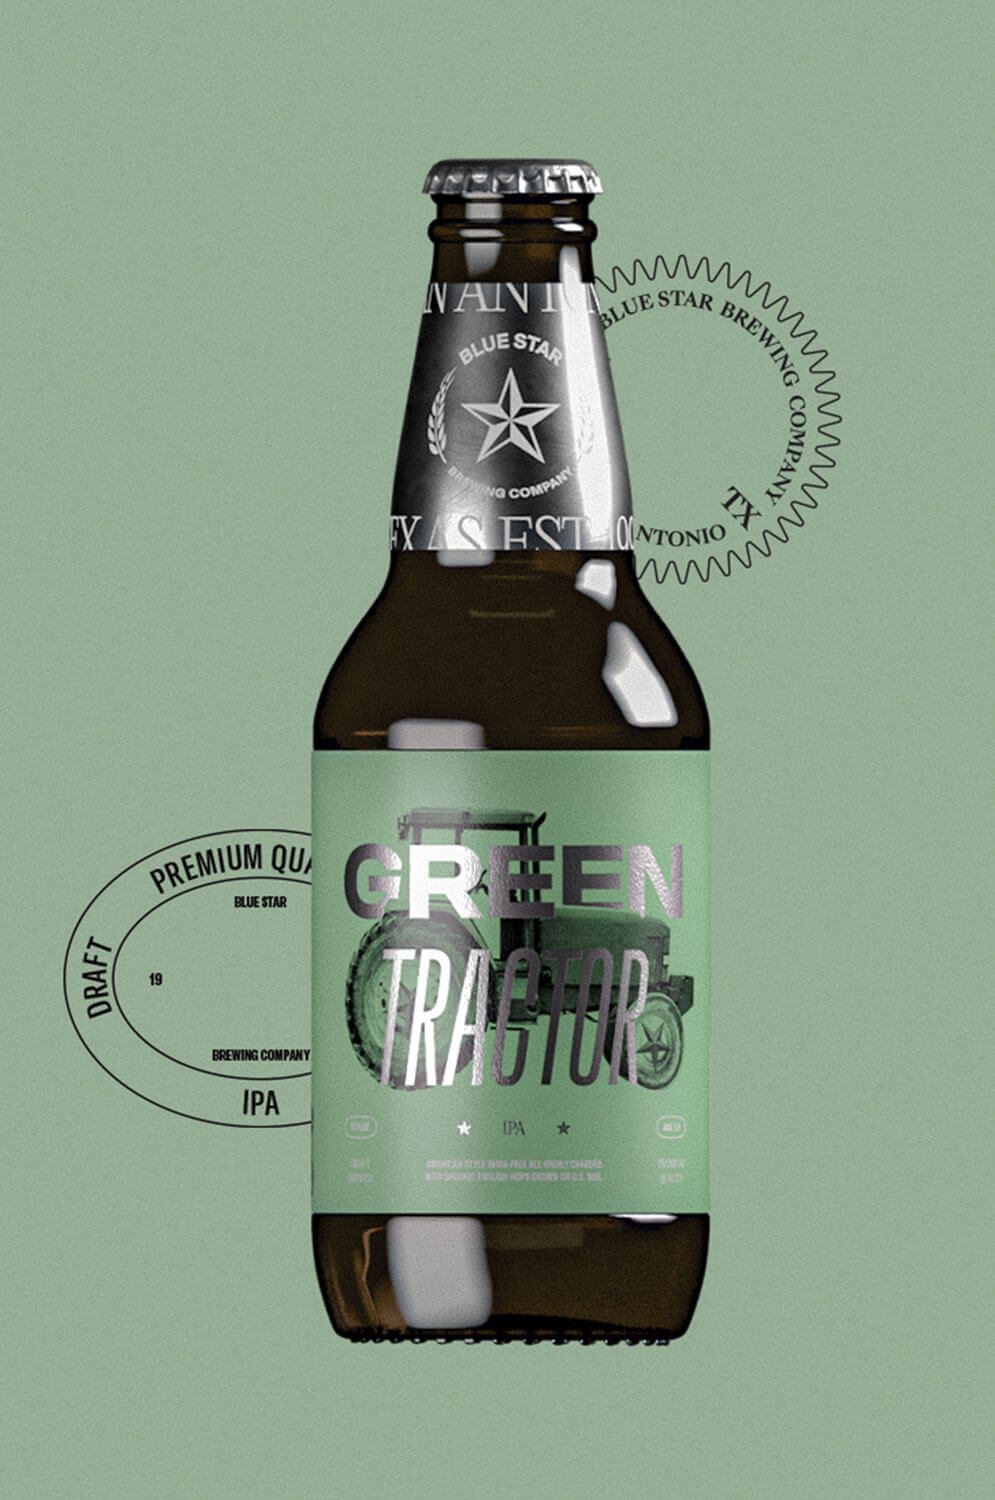 blue star project green tractor beer brand product packaging